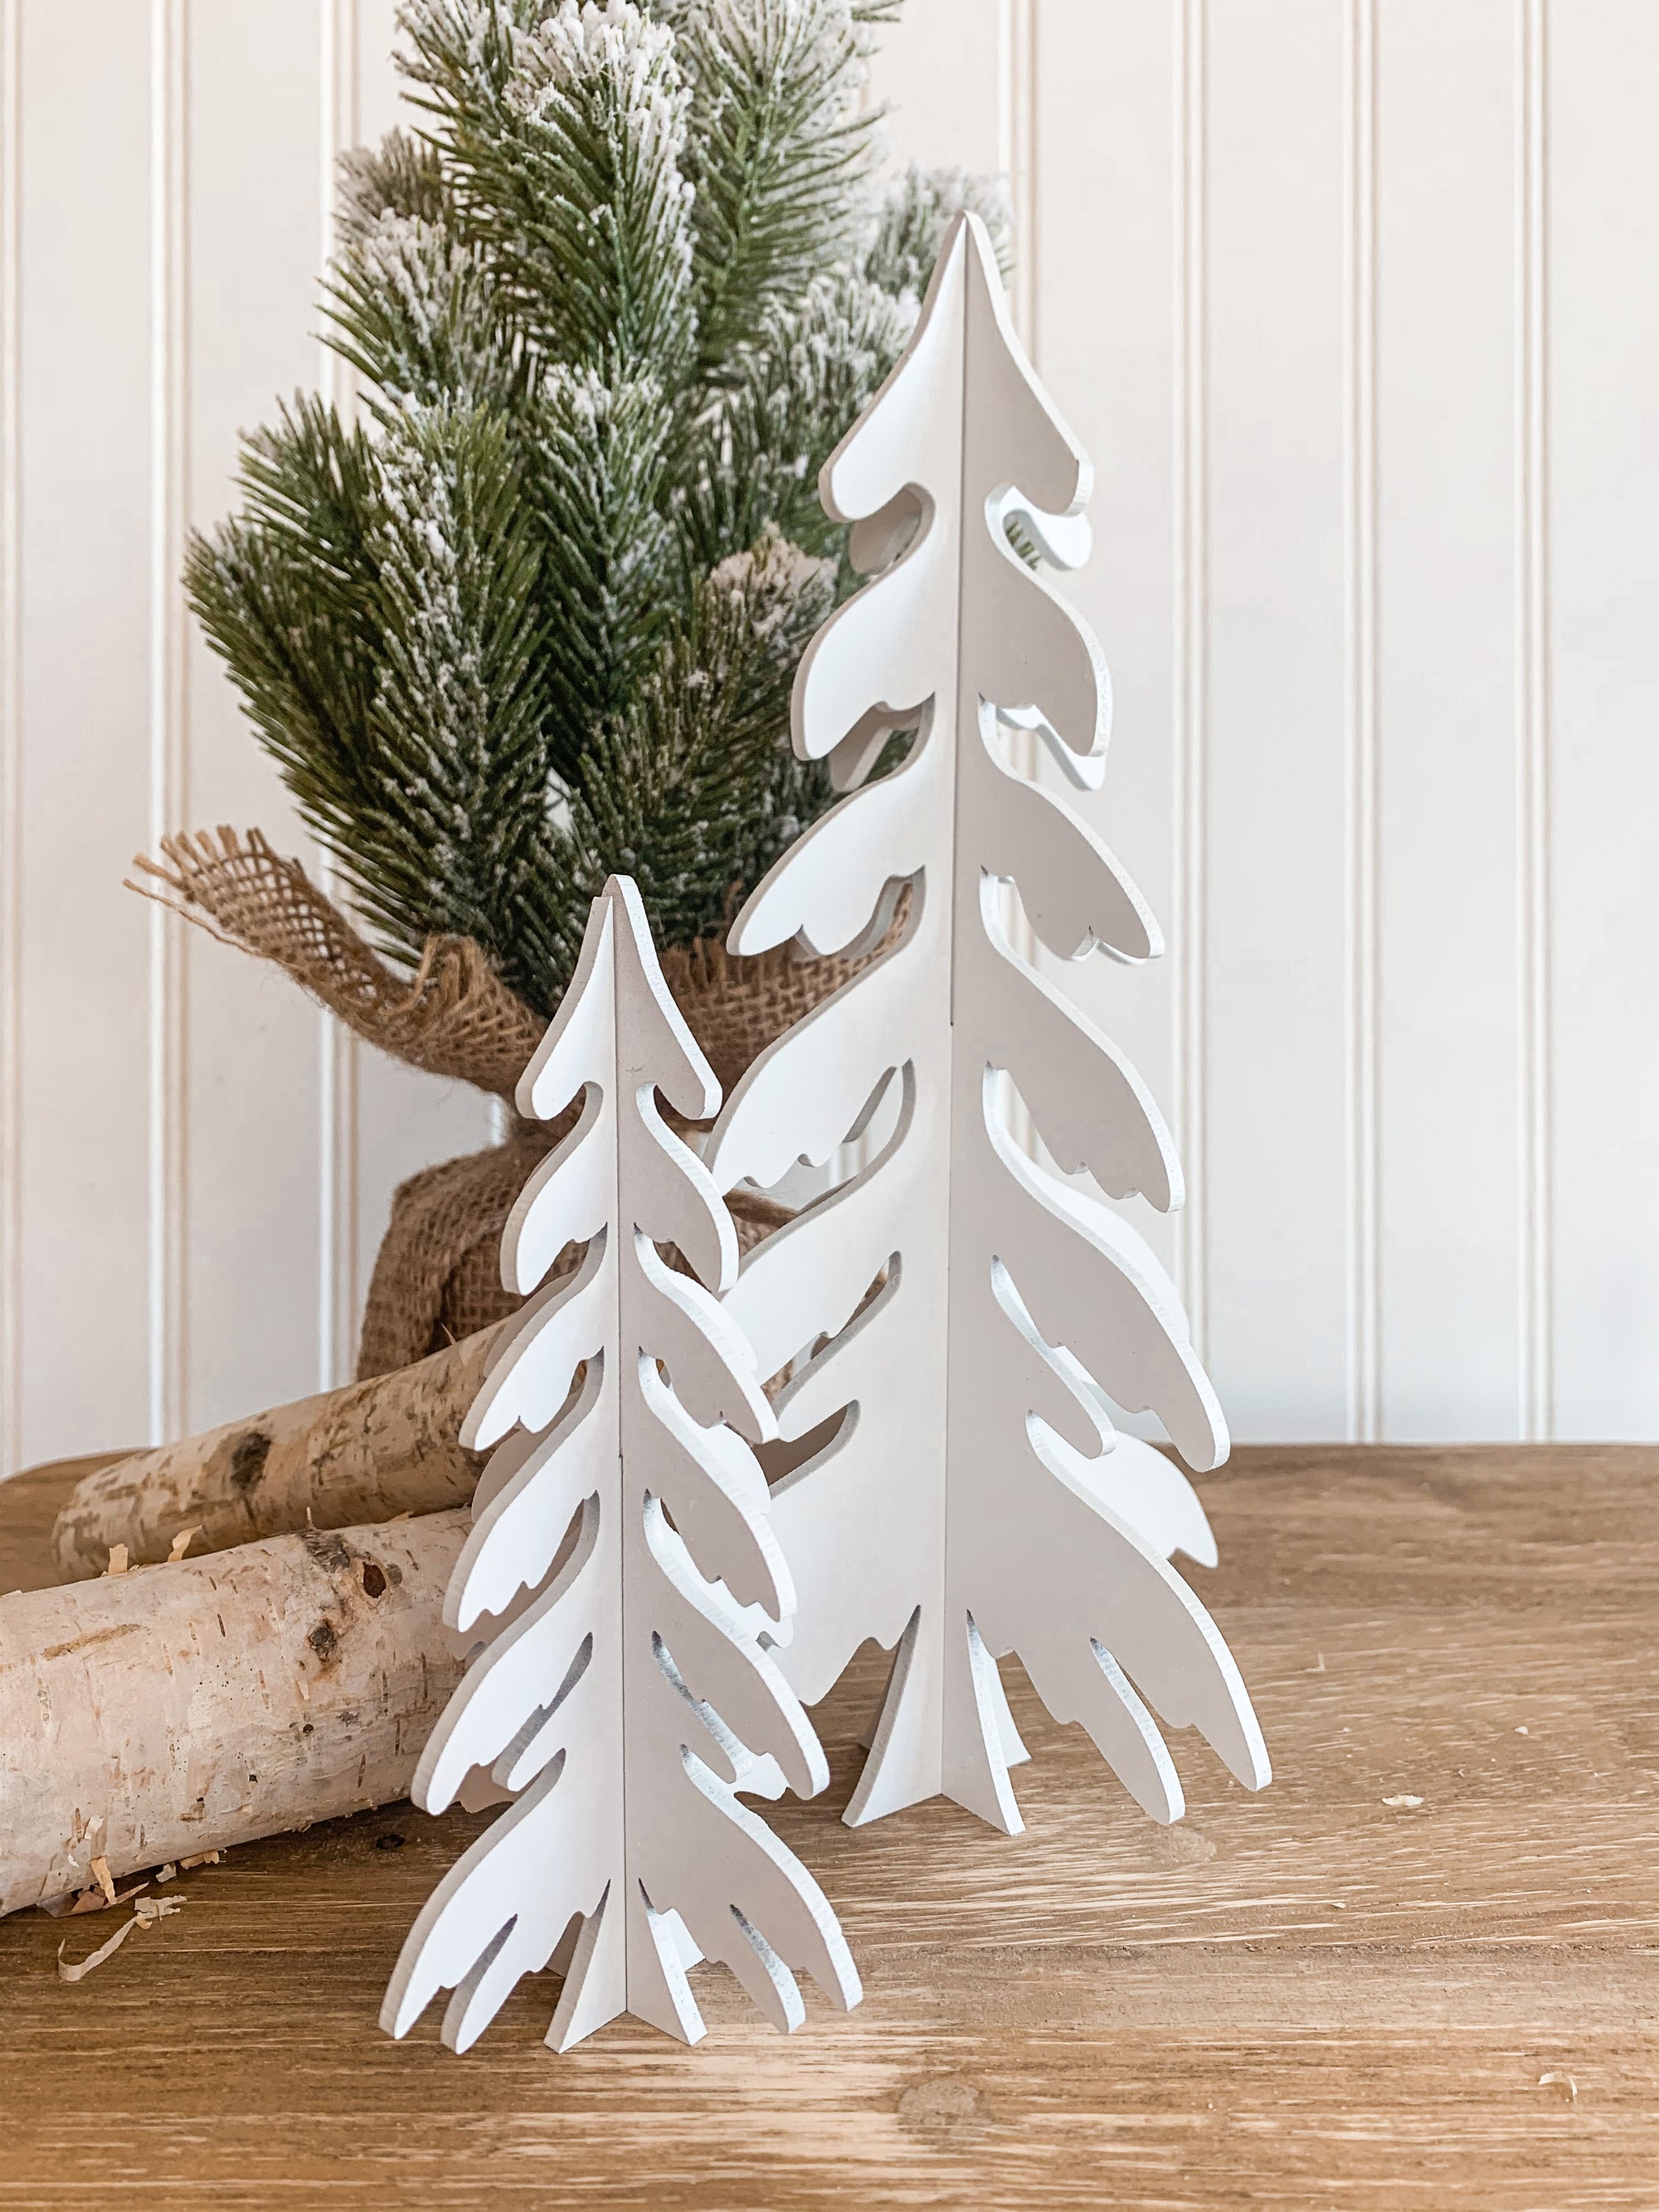 Dimensional wood winter trees for tiered tray decor, white winter wood trees, winter wood tree decorations, handmade winter home decorations